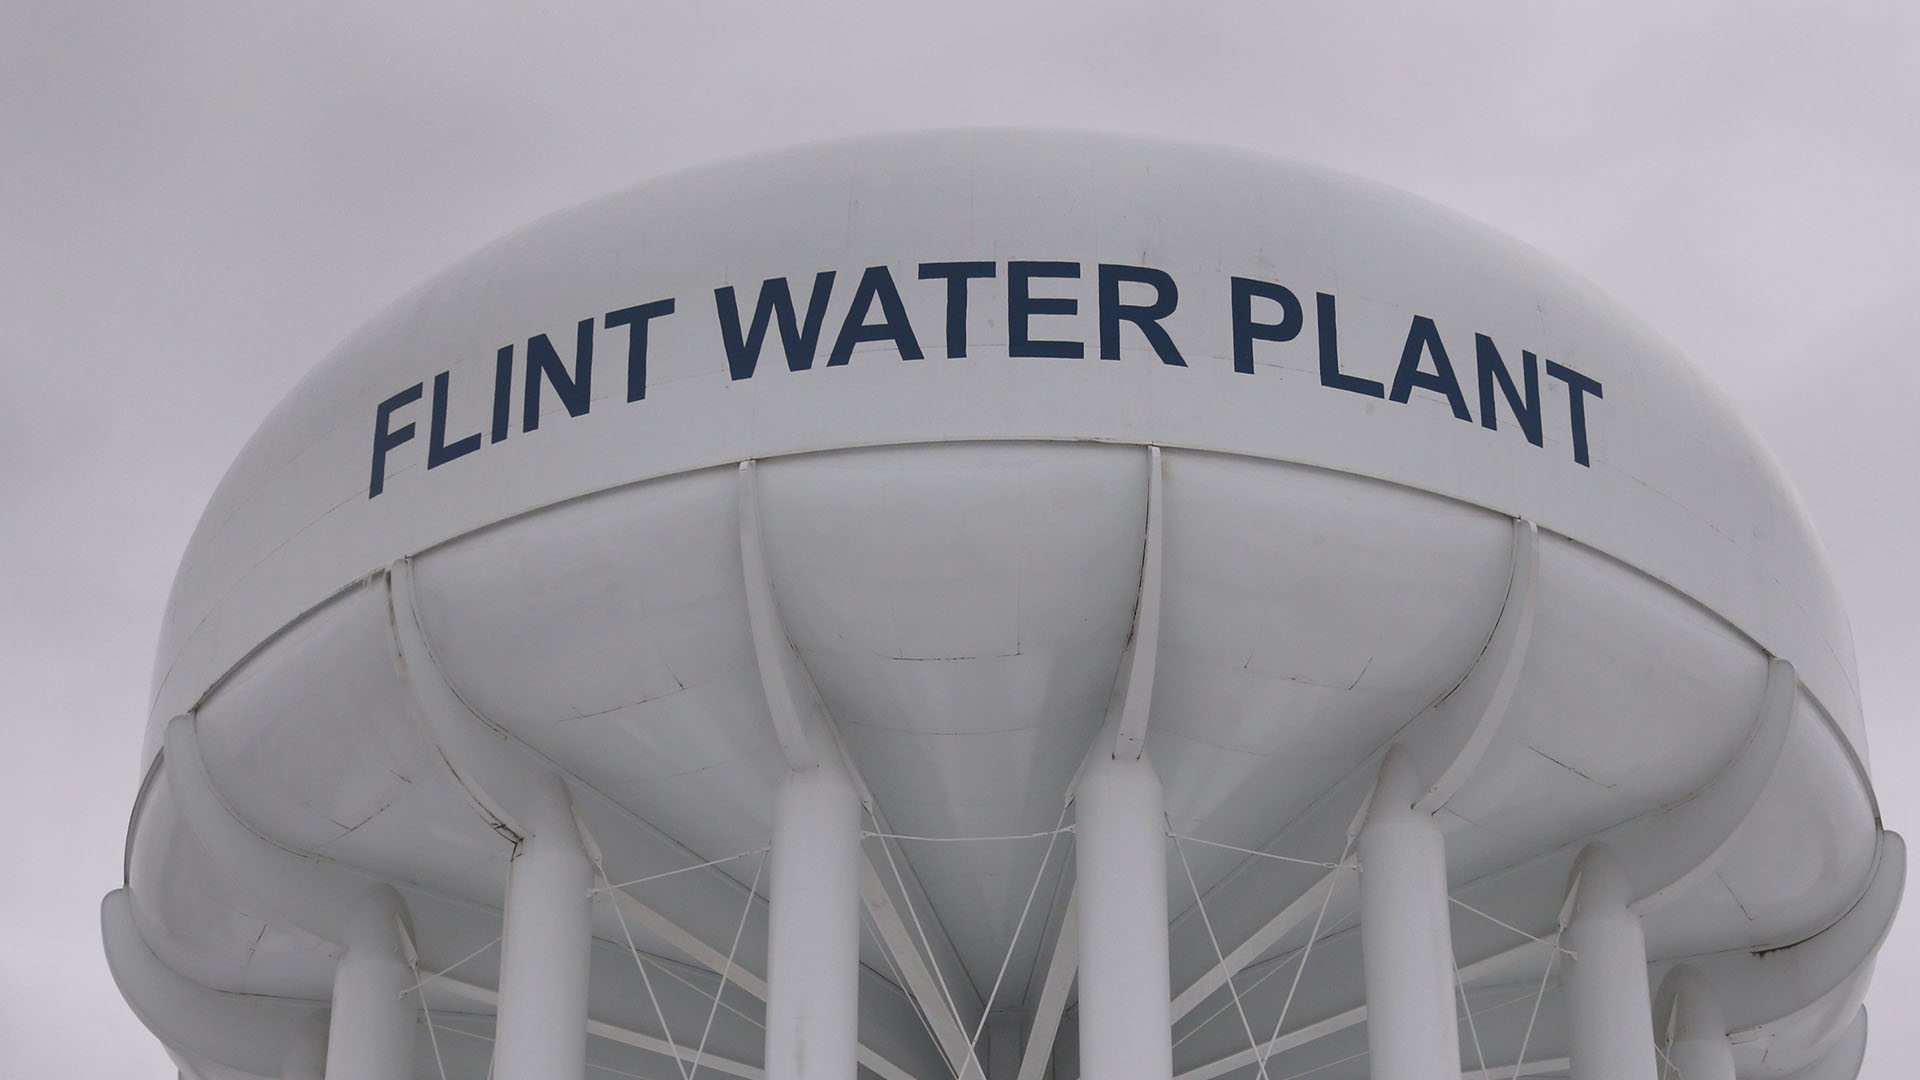 Six years after Flint water switch, residents fear justice may never come - Bridge Michigan